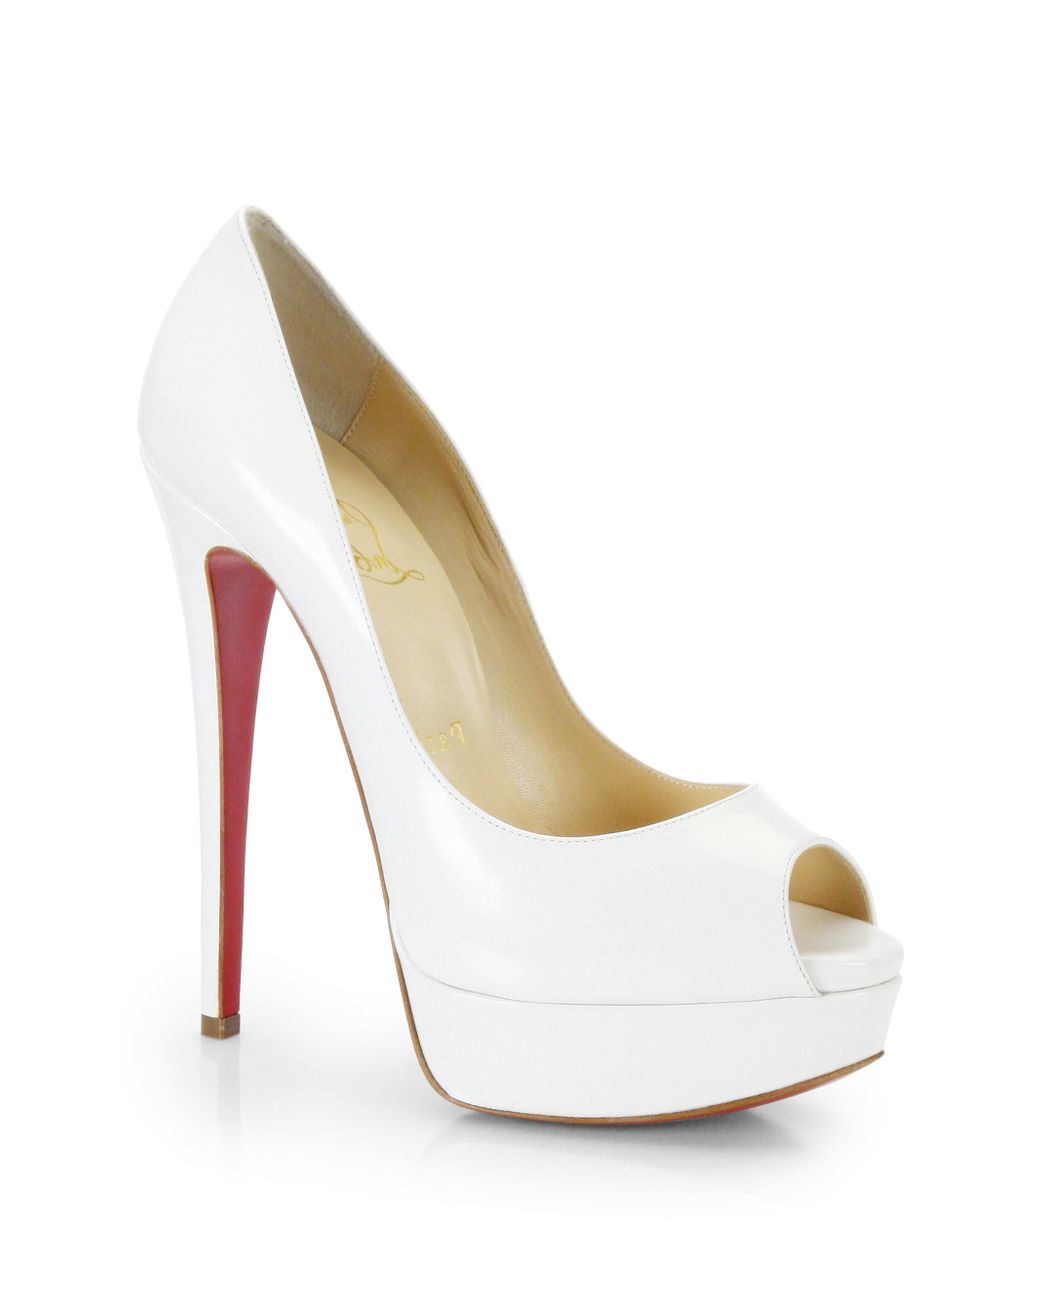 Børnecenter Modtager permeabilitet Christian Louboutin Lady Peep Leather Pumps in White | Lyst